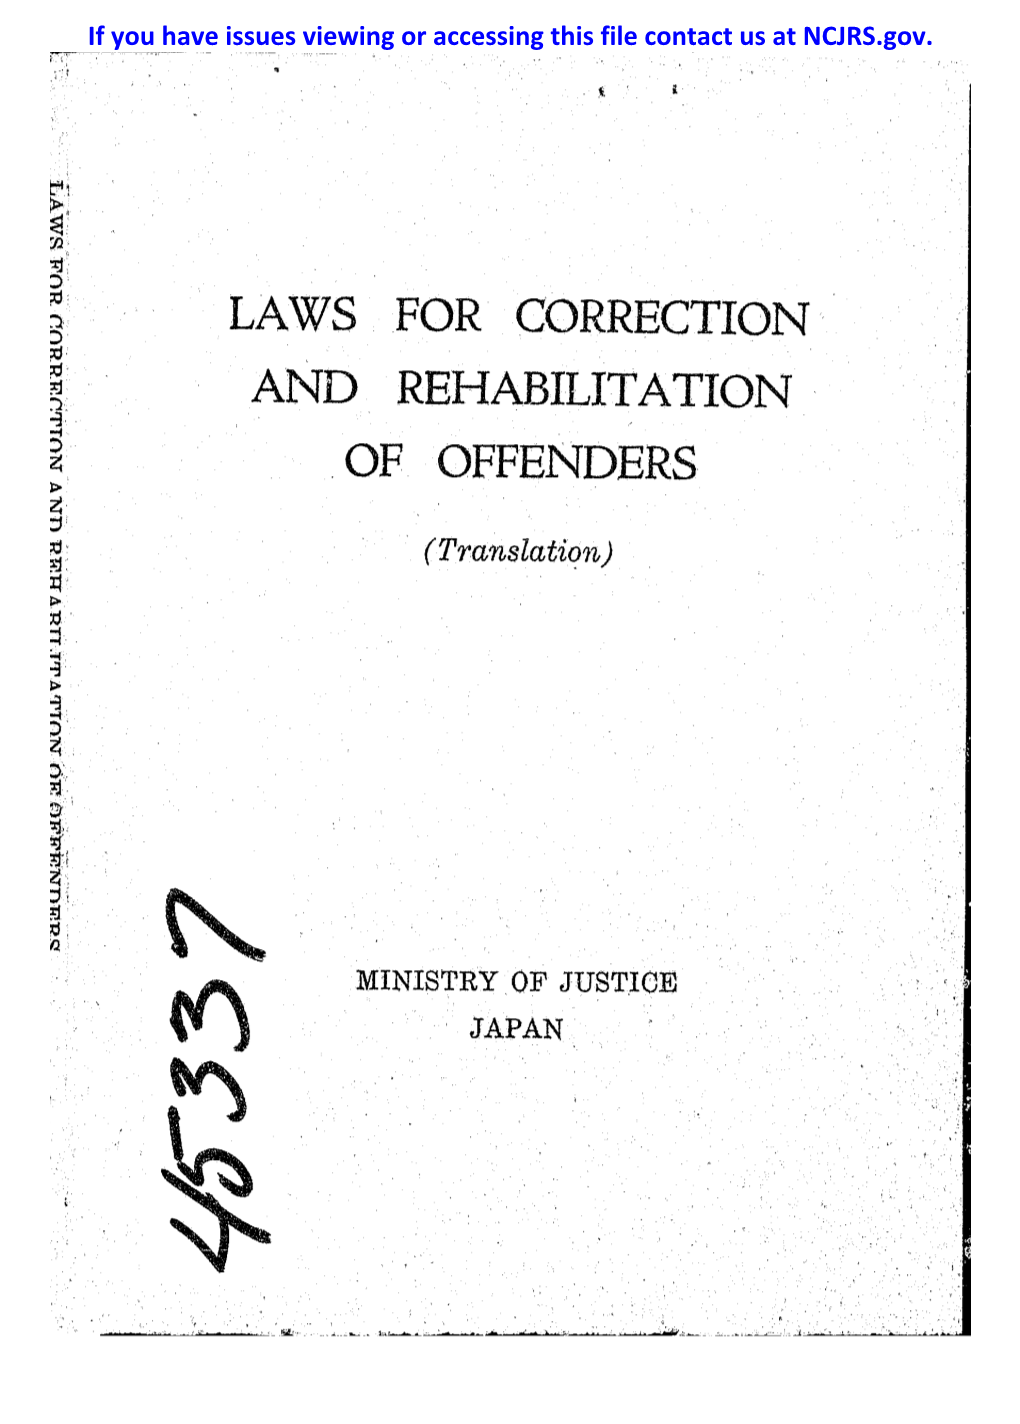 Laws for Correction and Rehabilitation